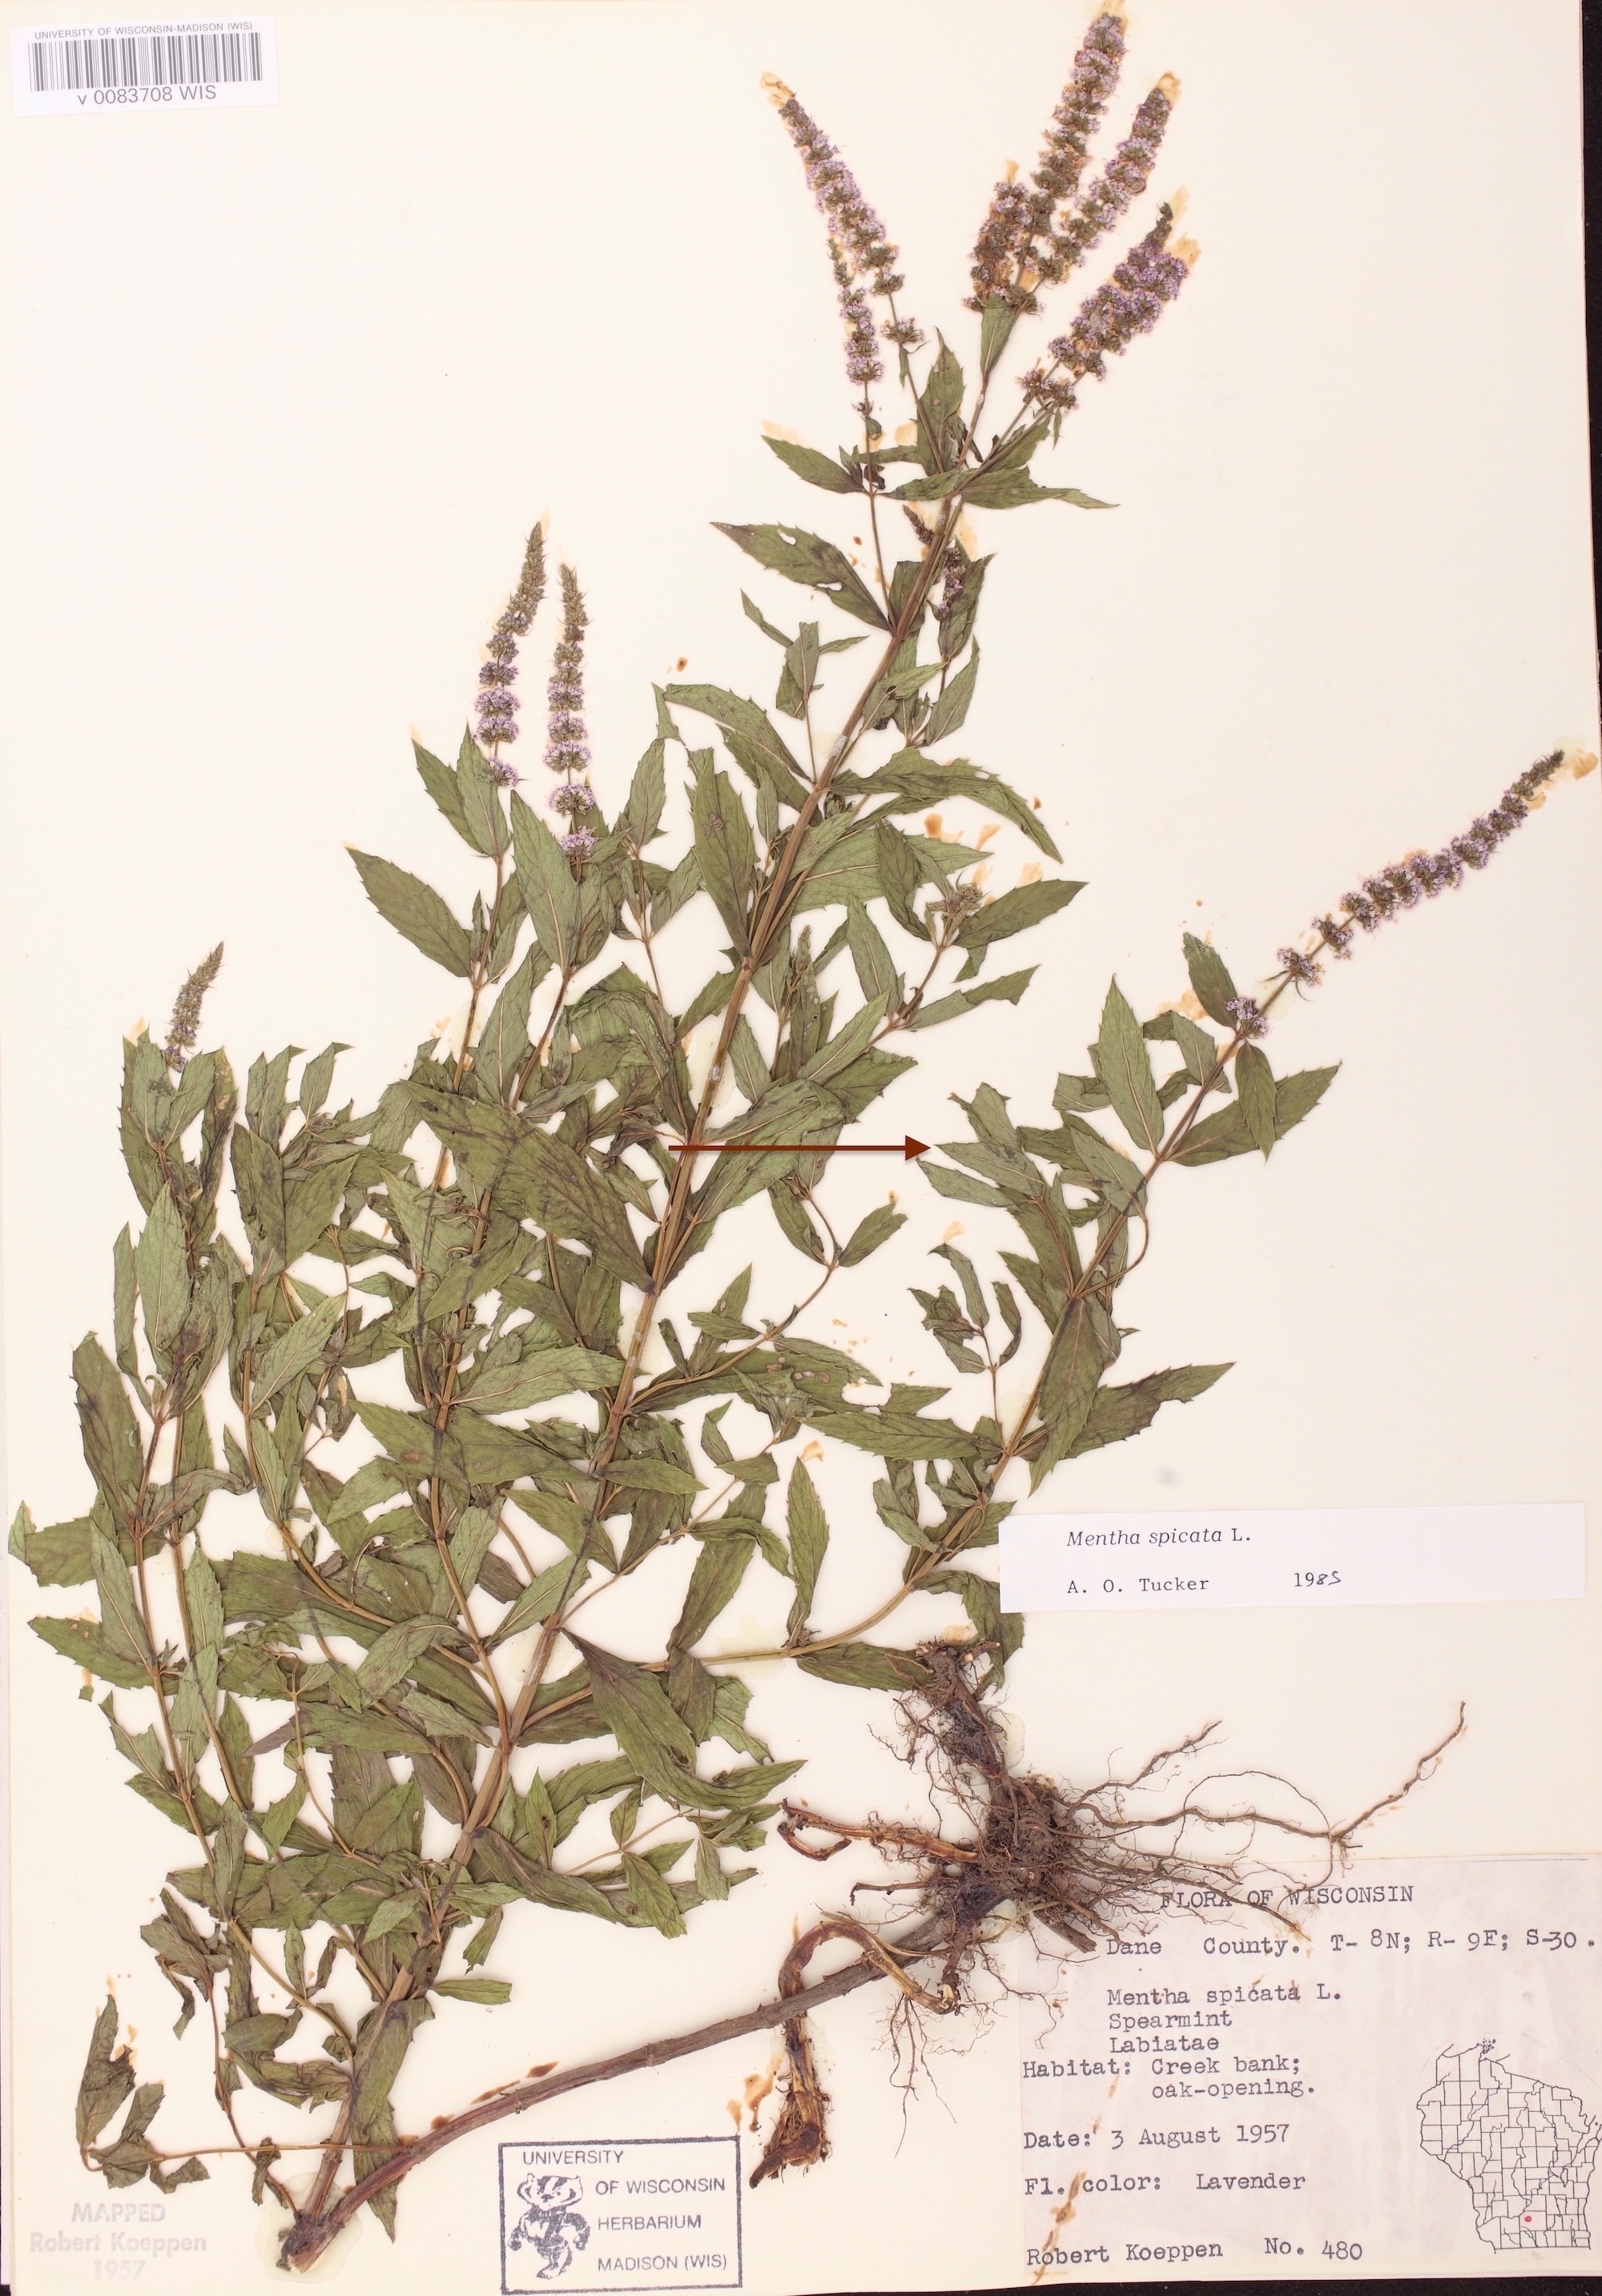 Spearmint specimen collected on a creek bank in Dane County, Wisconsin on August 3, 1957.